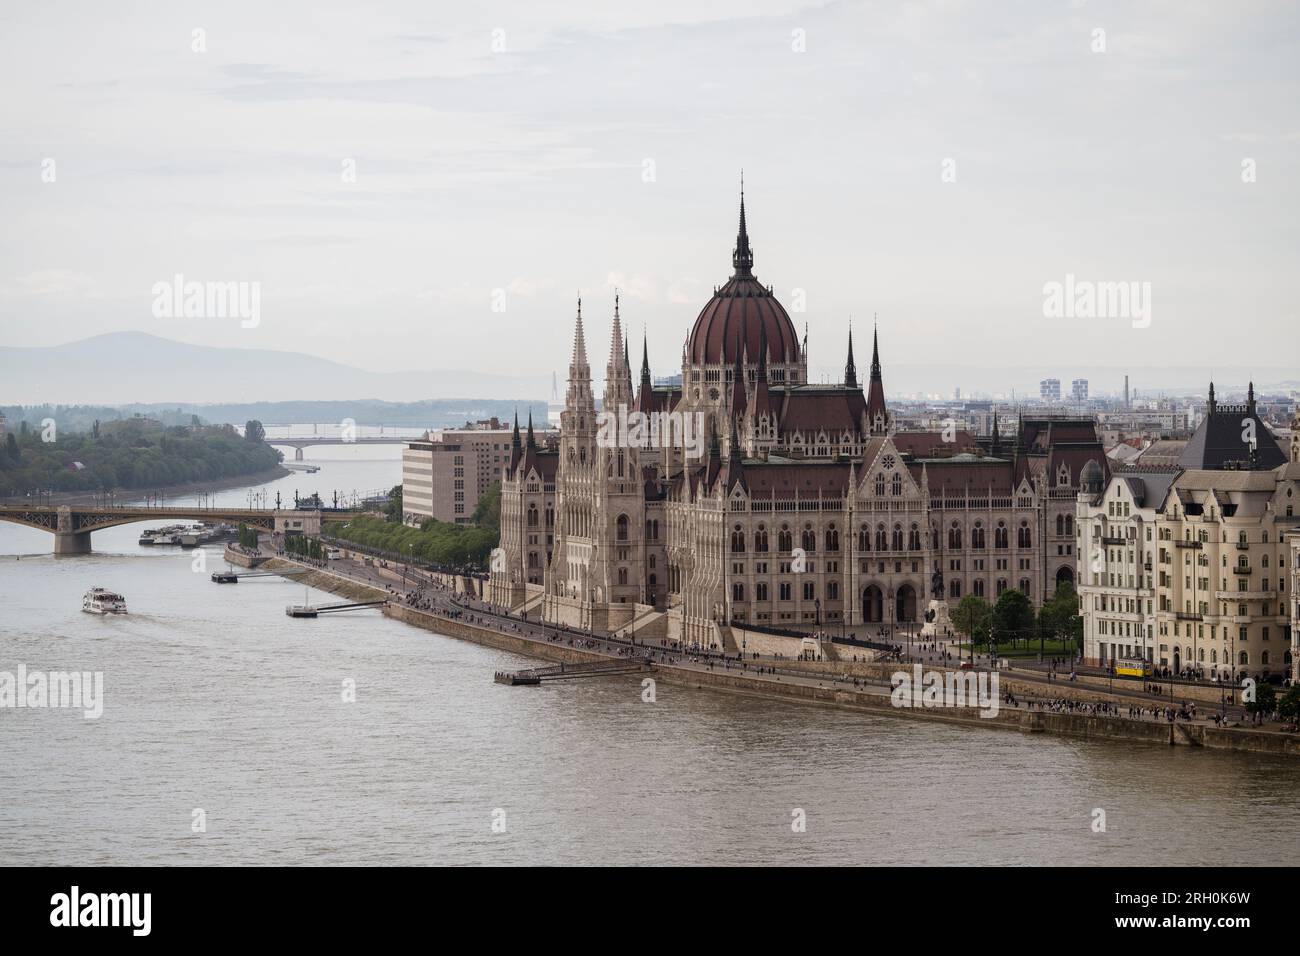 Hungary's Parliament building stands amidst serene gray Stock Photo